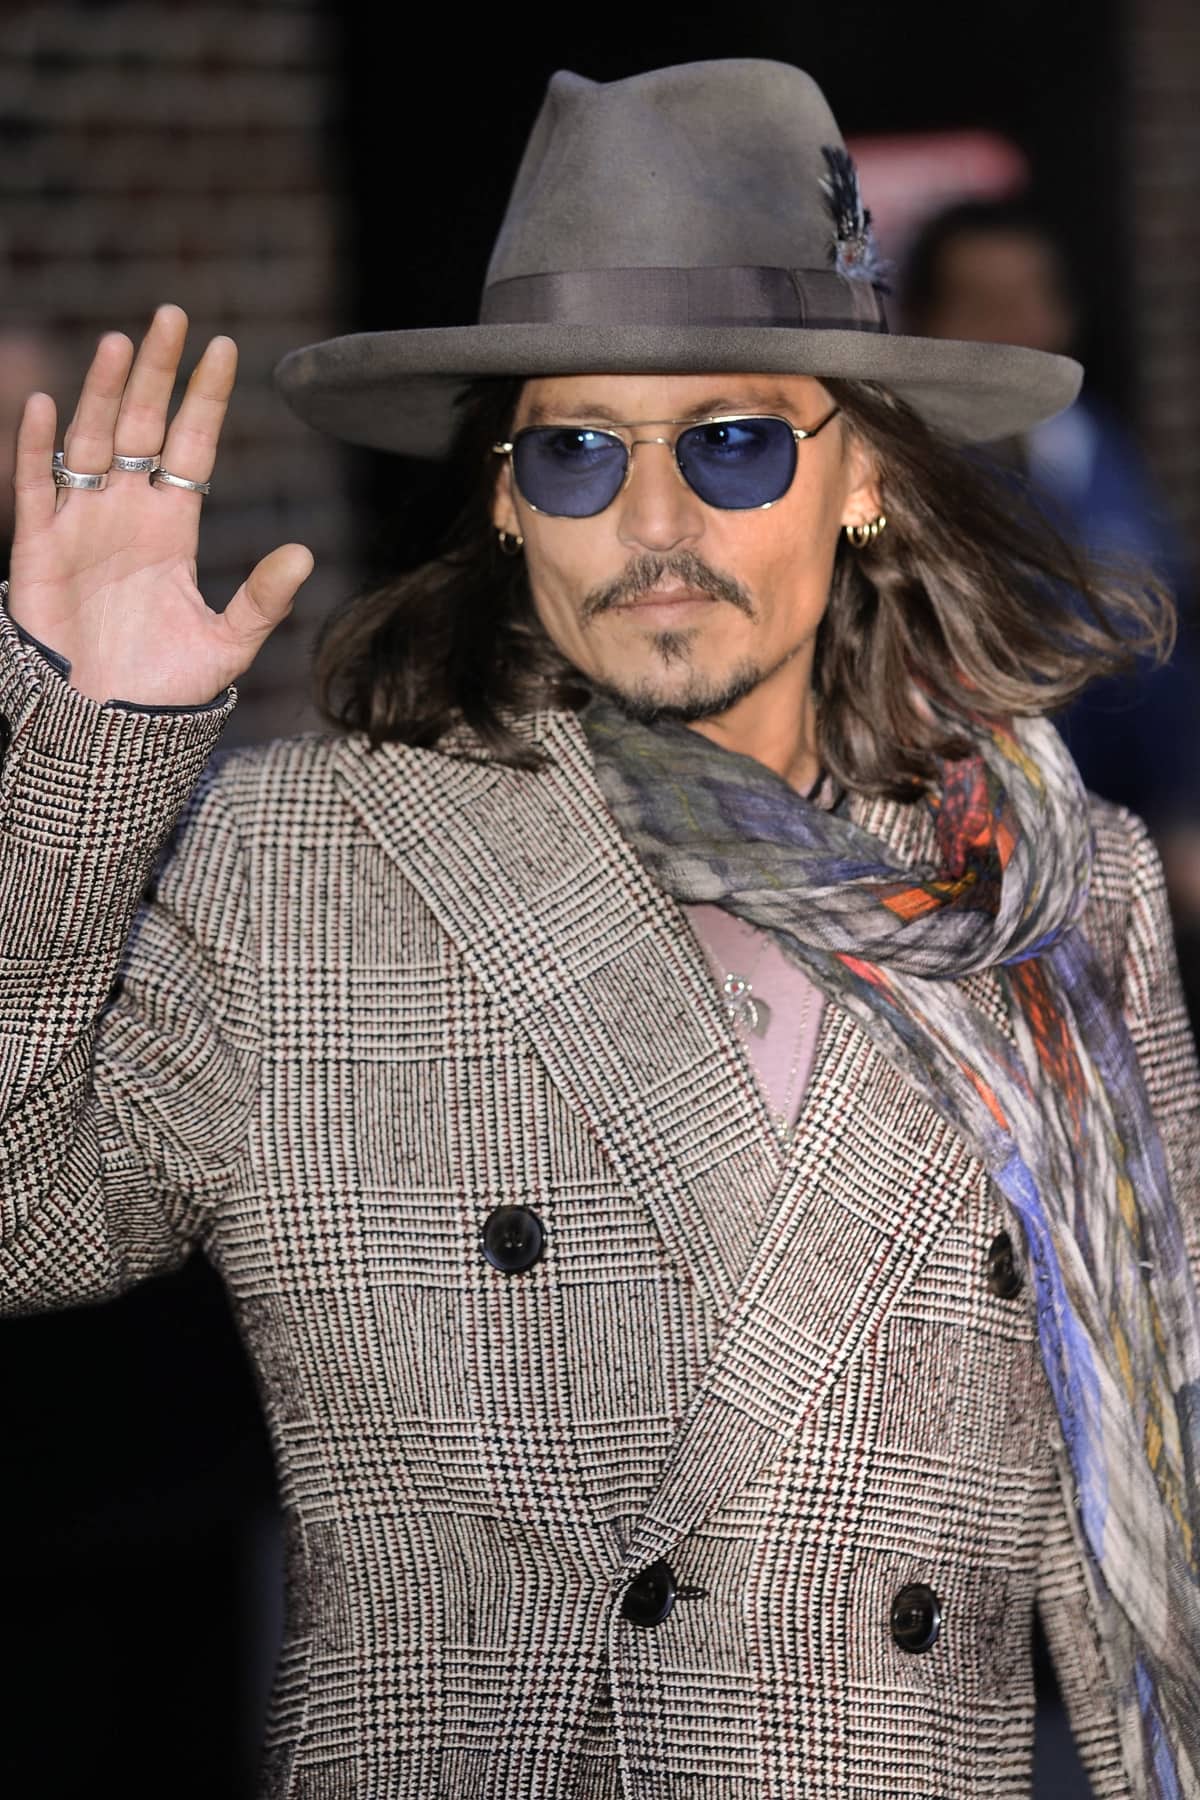 Johnny Depp elevated his unique style by accessorizing with a Faliero Sarti scarf, adding a touch of Italian luxury and sophisticated flair to his ensemble